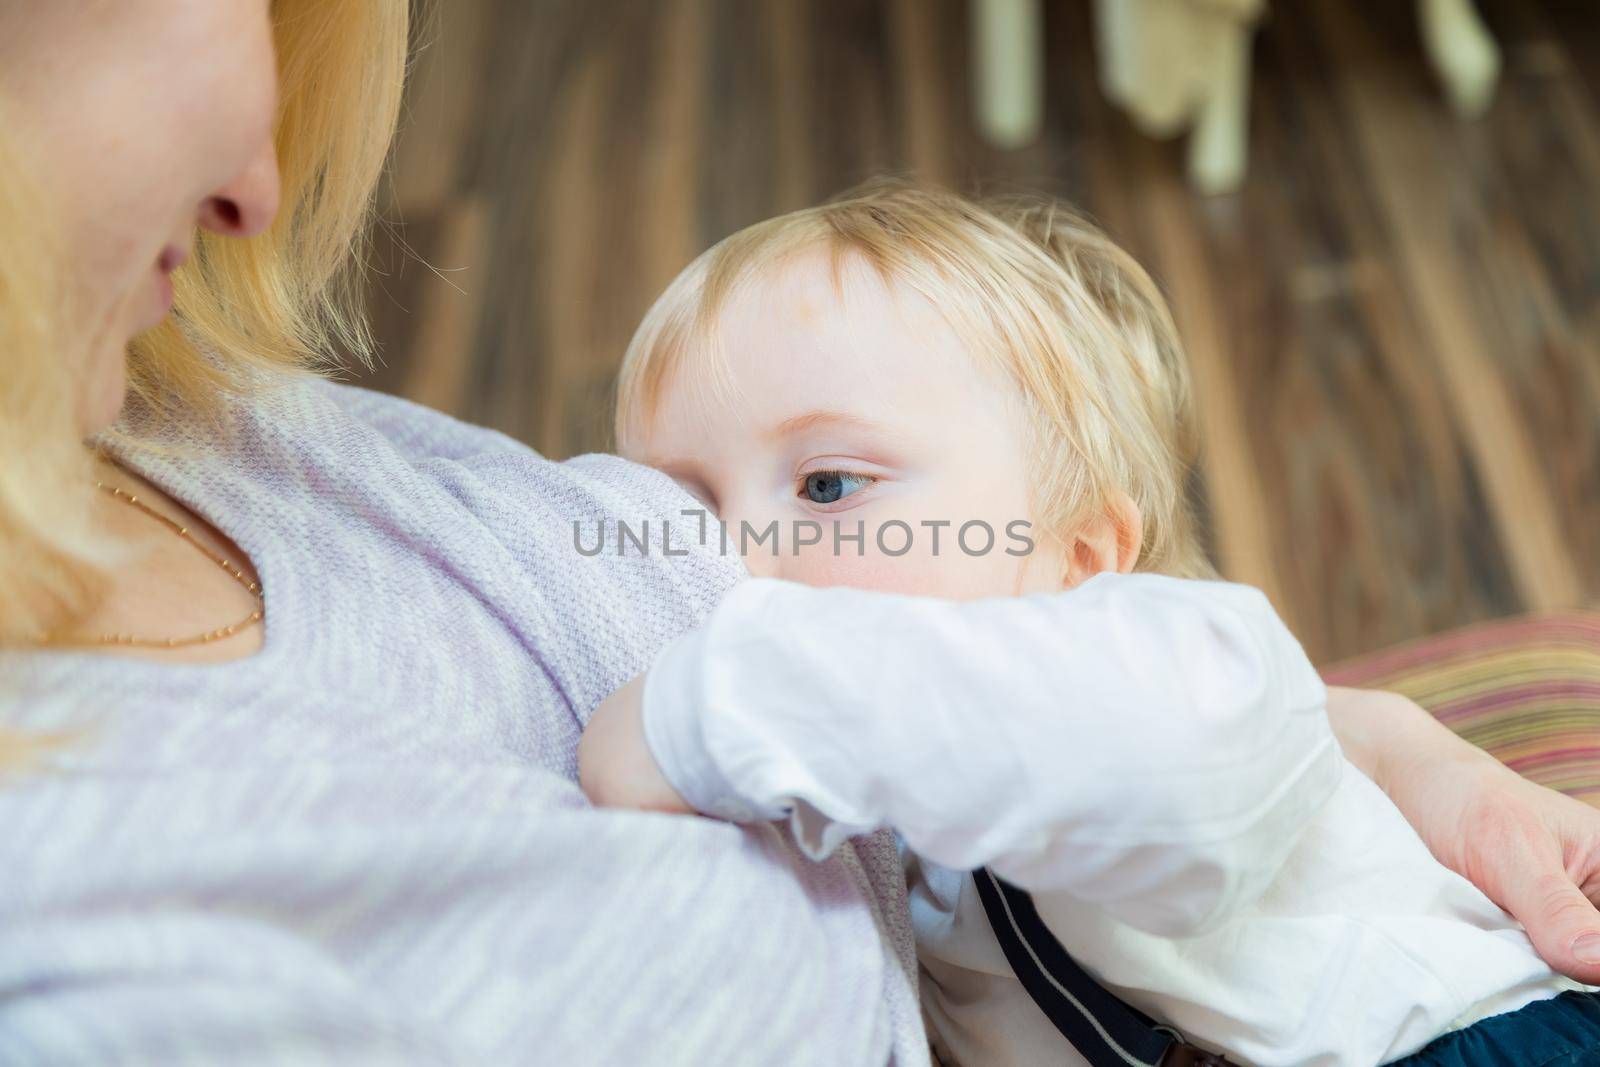 Mom is breastfeeding the baby. She looks at the baby with love and tenderness by Yurich32